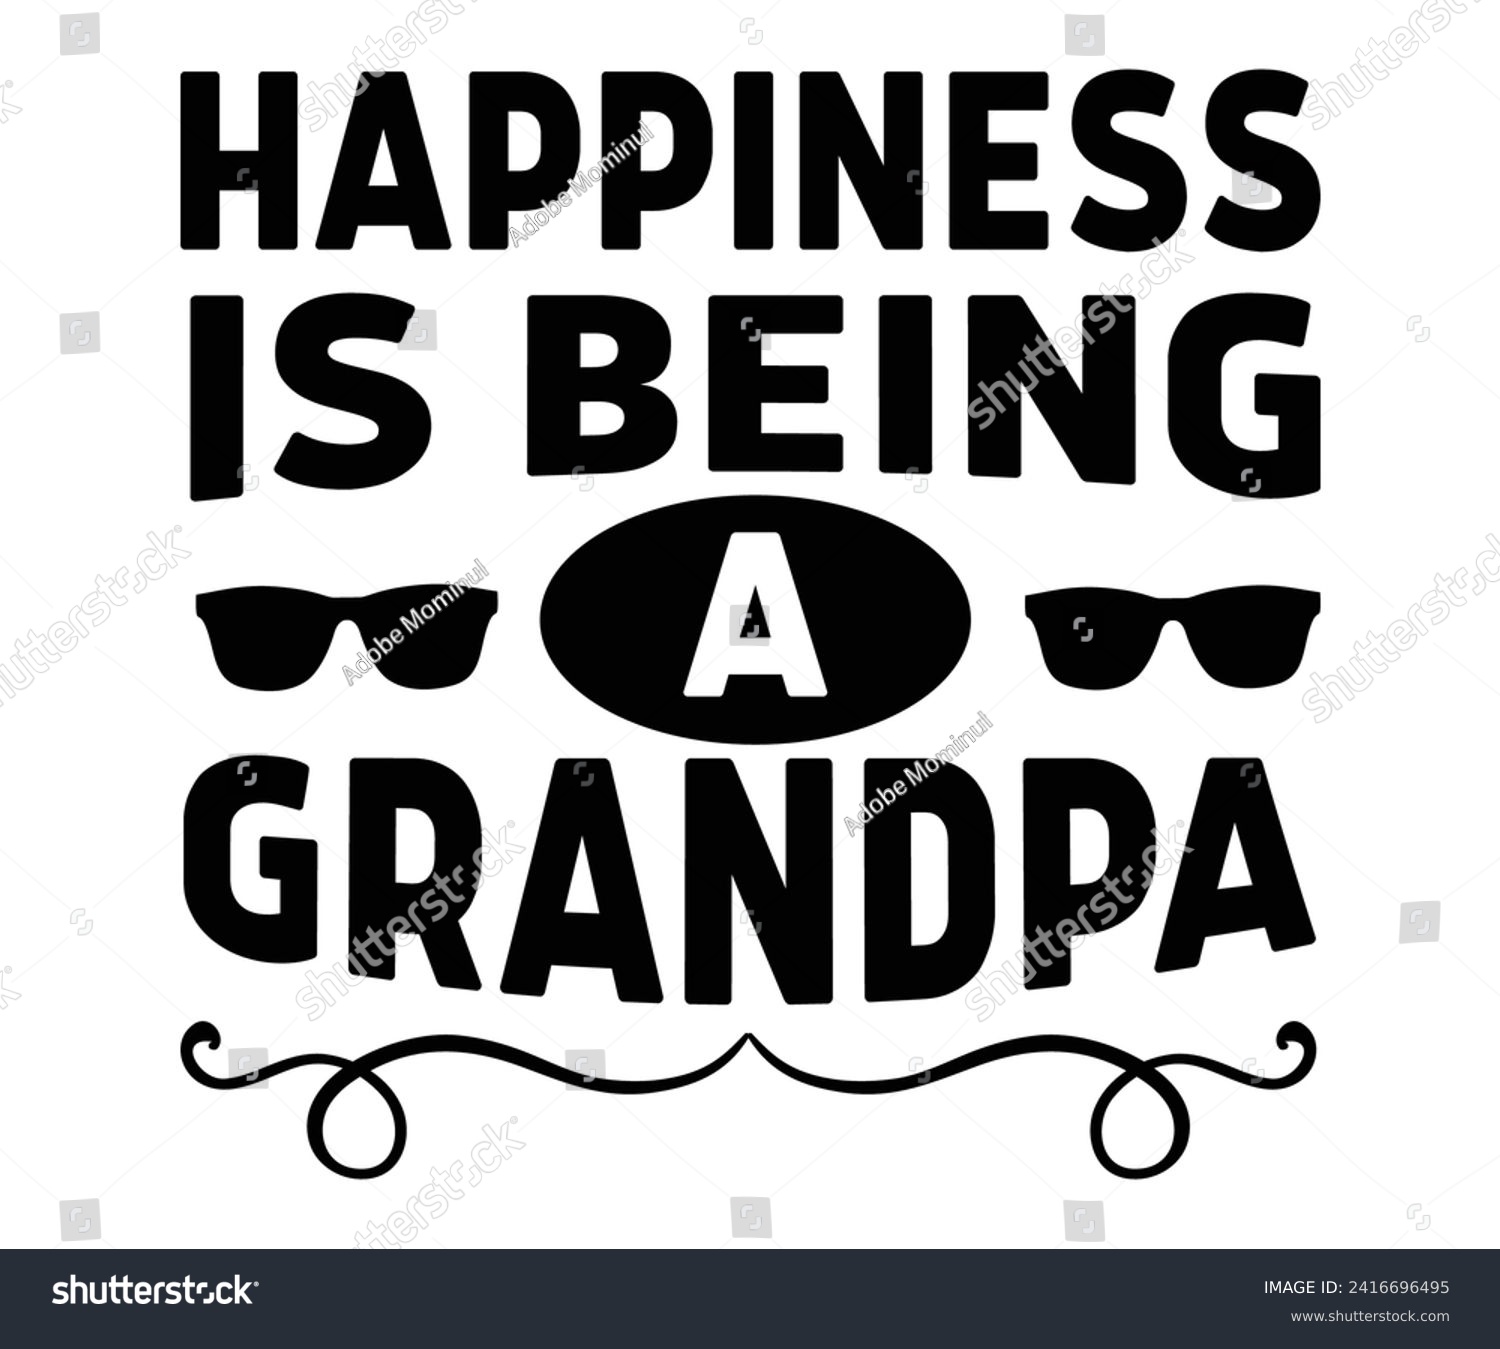 SVG of Happiness is Being a Grandpa Svg,Father's Day Svg,Papa svg,Grandpa Svg,Father's Day Saying Qoutes,Dad Svg,Funny Father, Gift For Dad Svg,Daddy Svg,Family Svg,T shirt Design,Svg Cut File,Typography svg